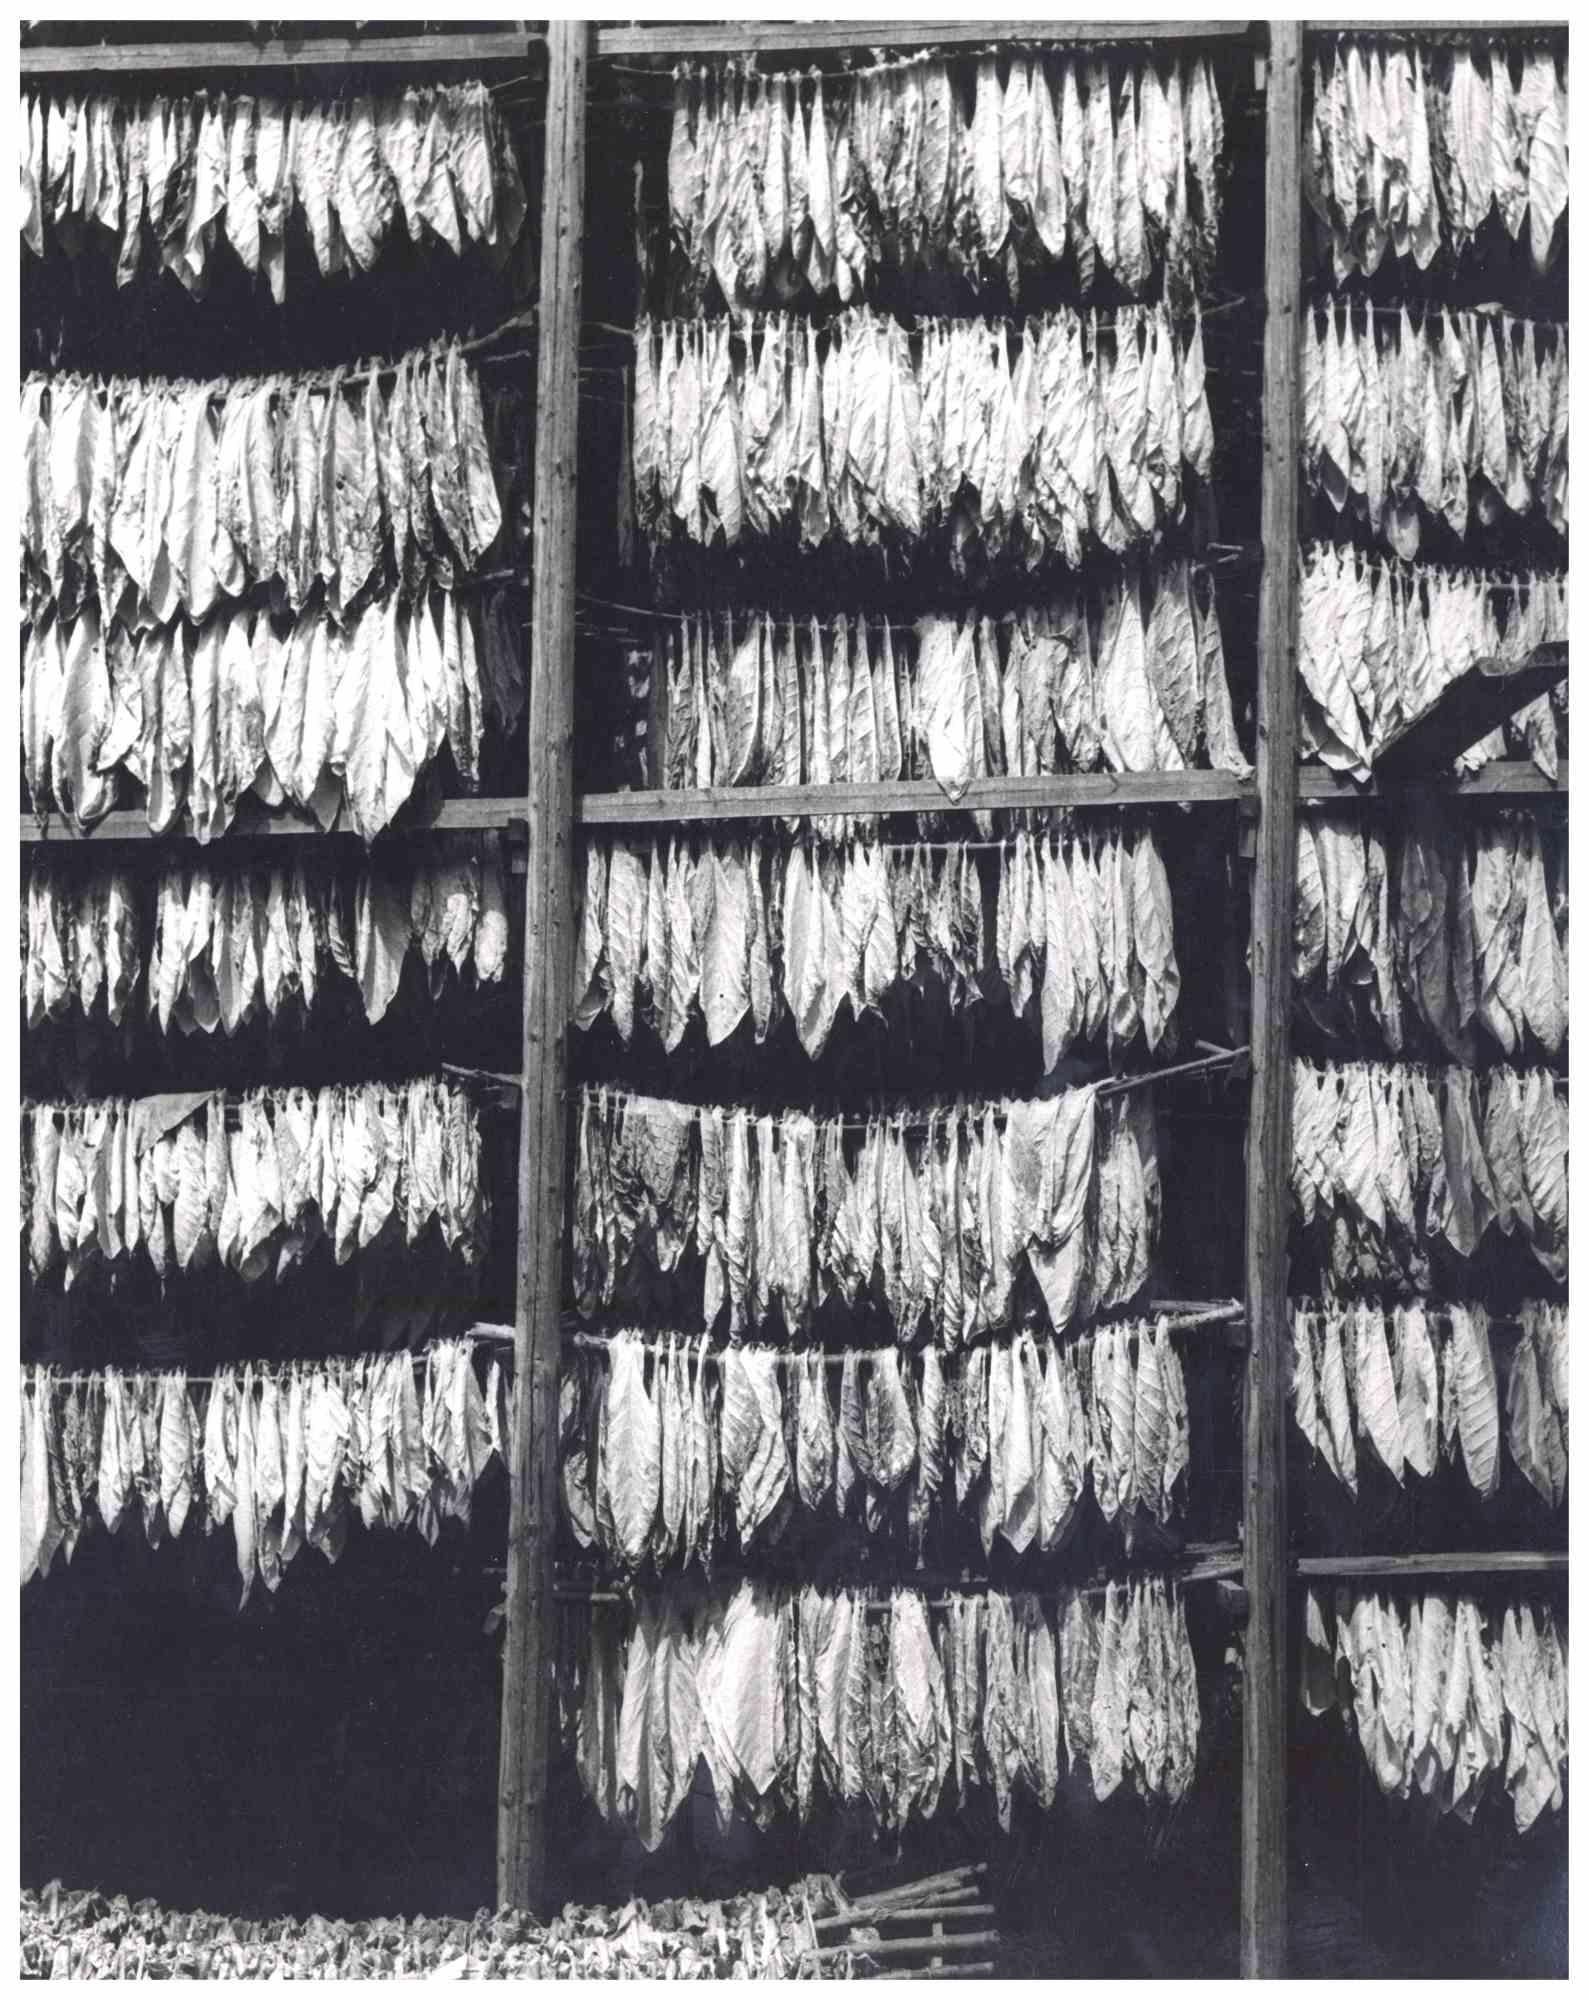 Harold Miller Null Black and White Photograph - Tobacco Leaves by Miller Null -  Photograph - 1950s